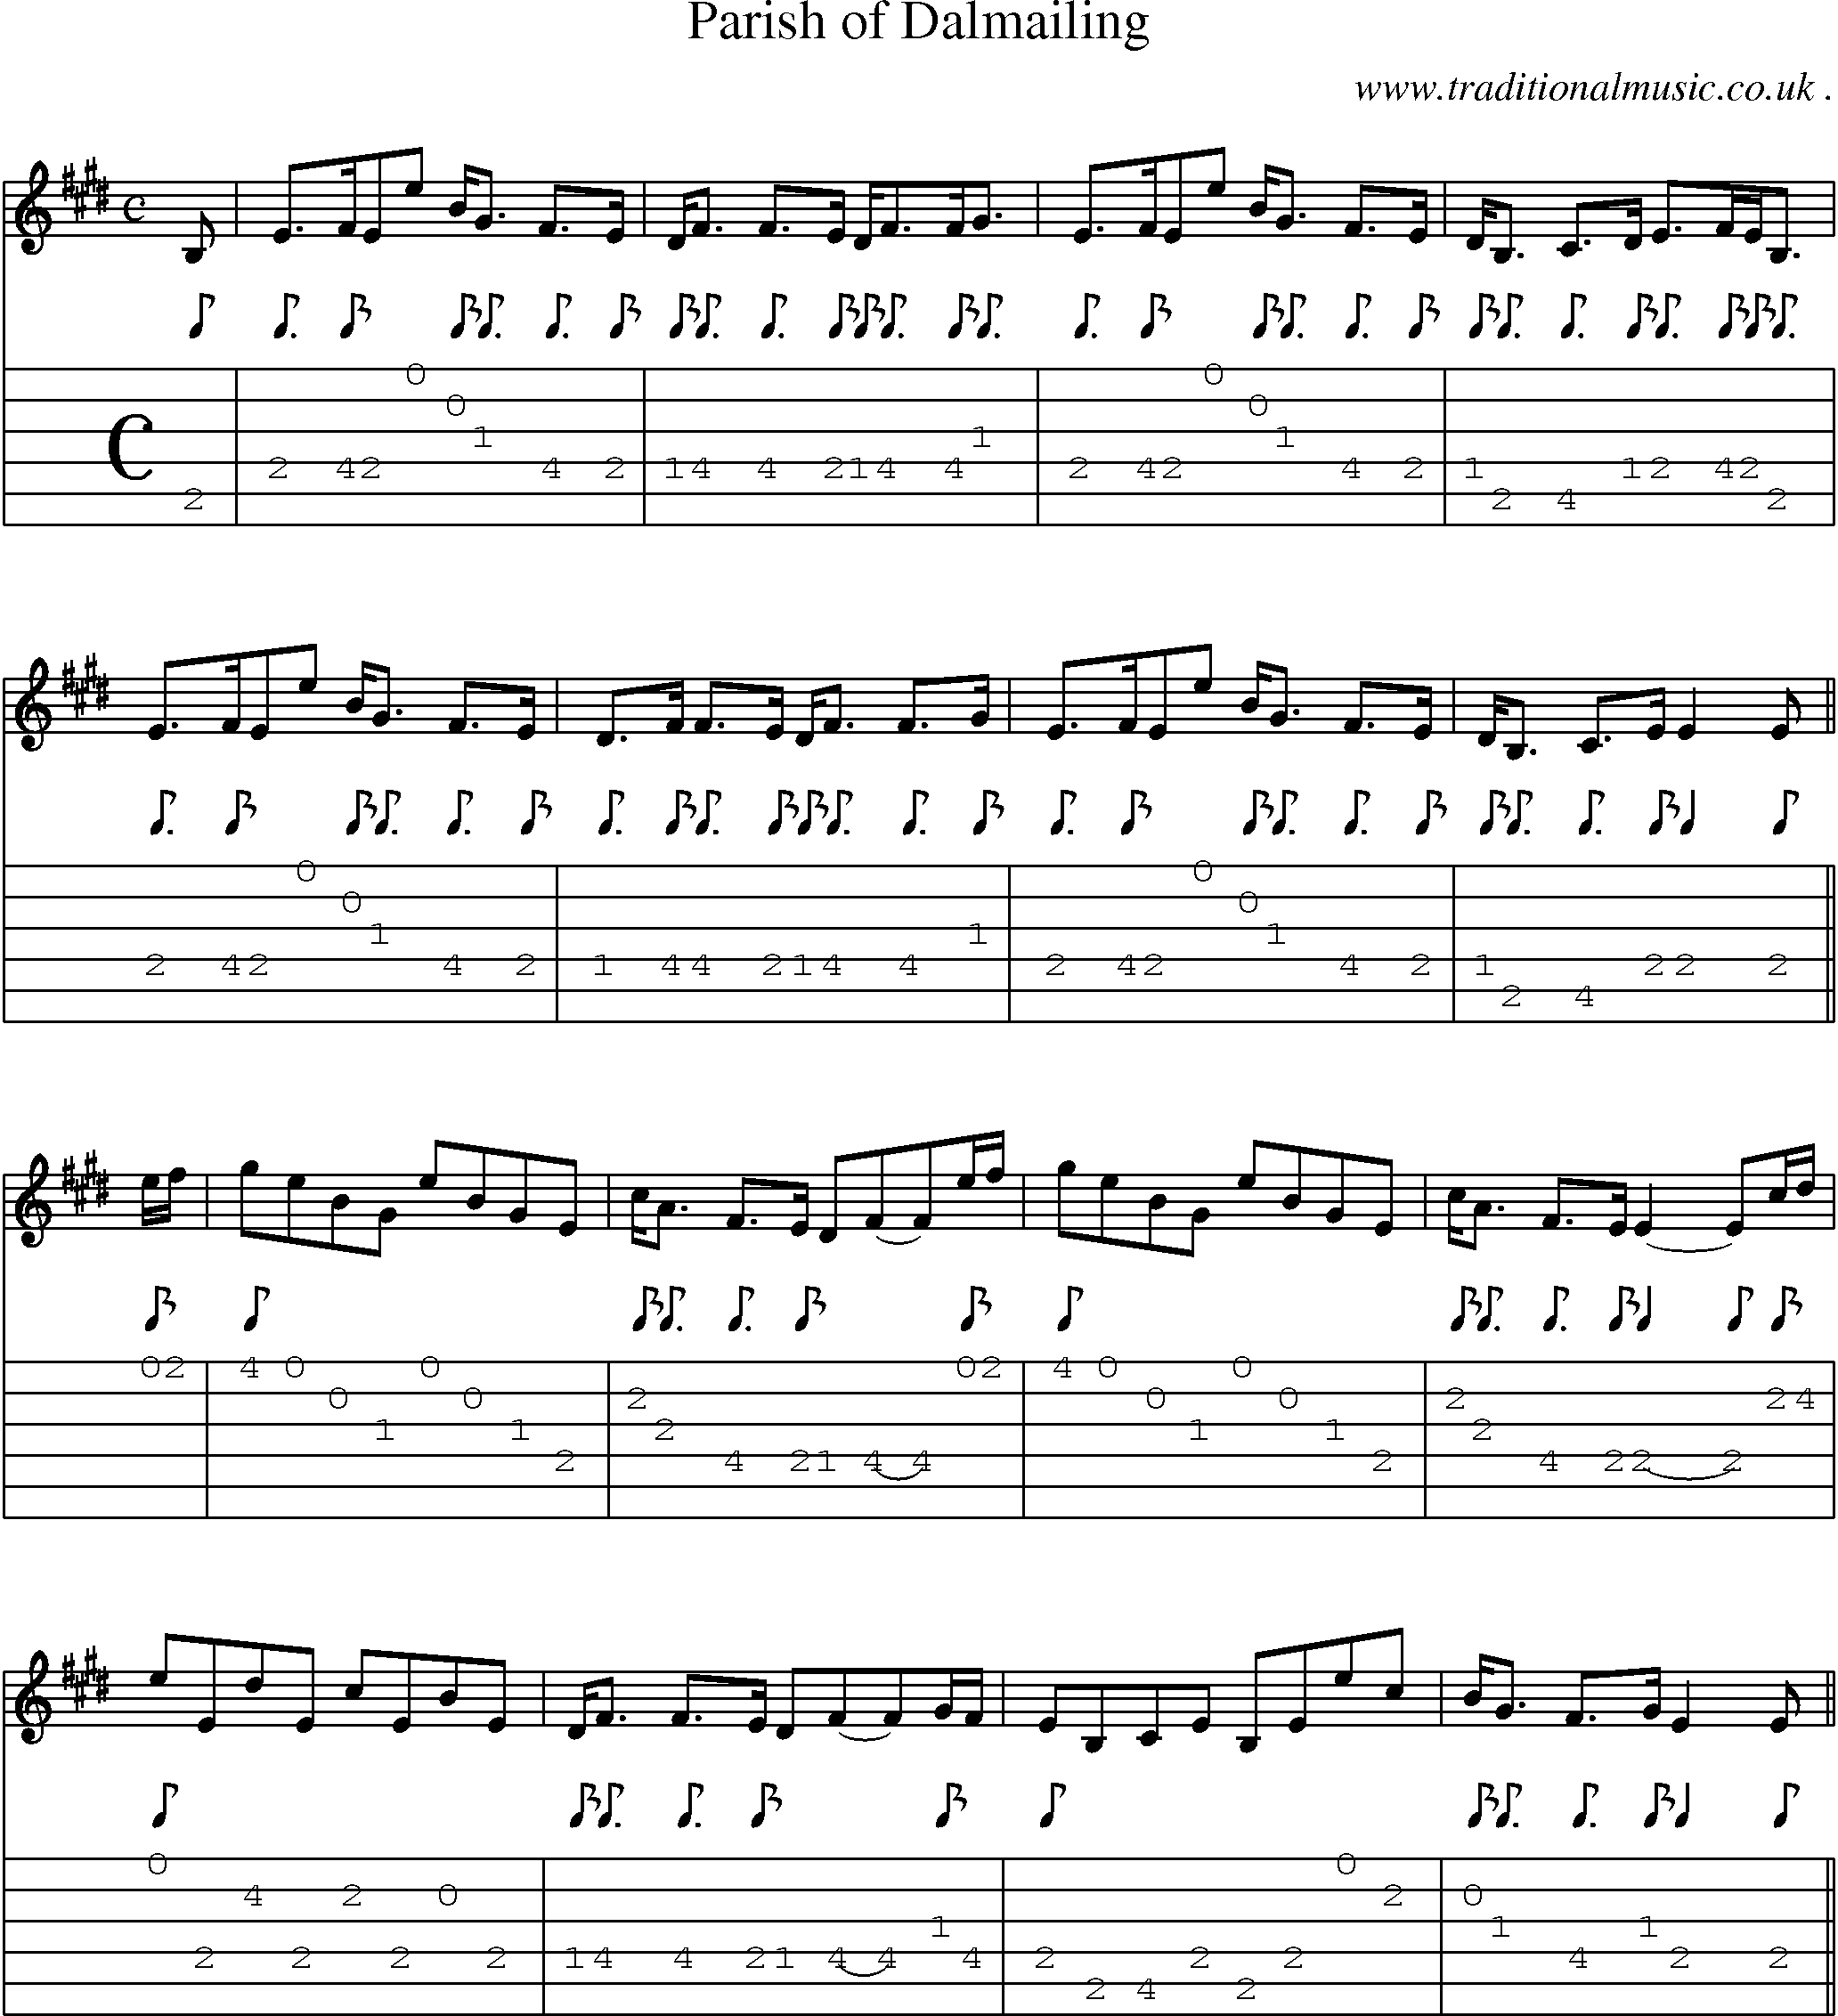 Sheet-music  score, Chords and Guitar Tabs for Parish Of Dalmailing